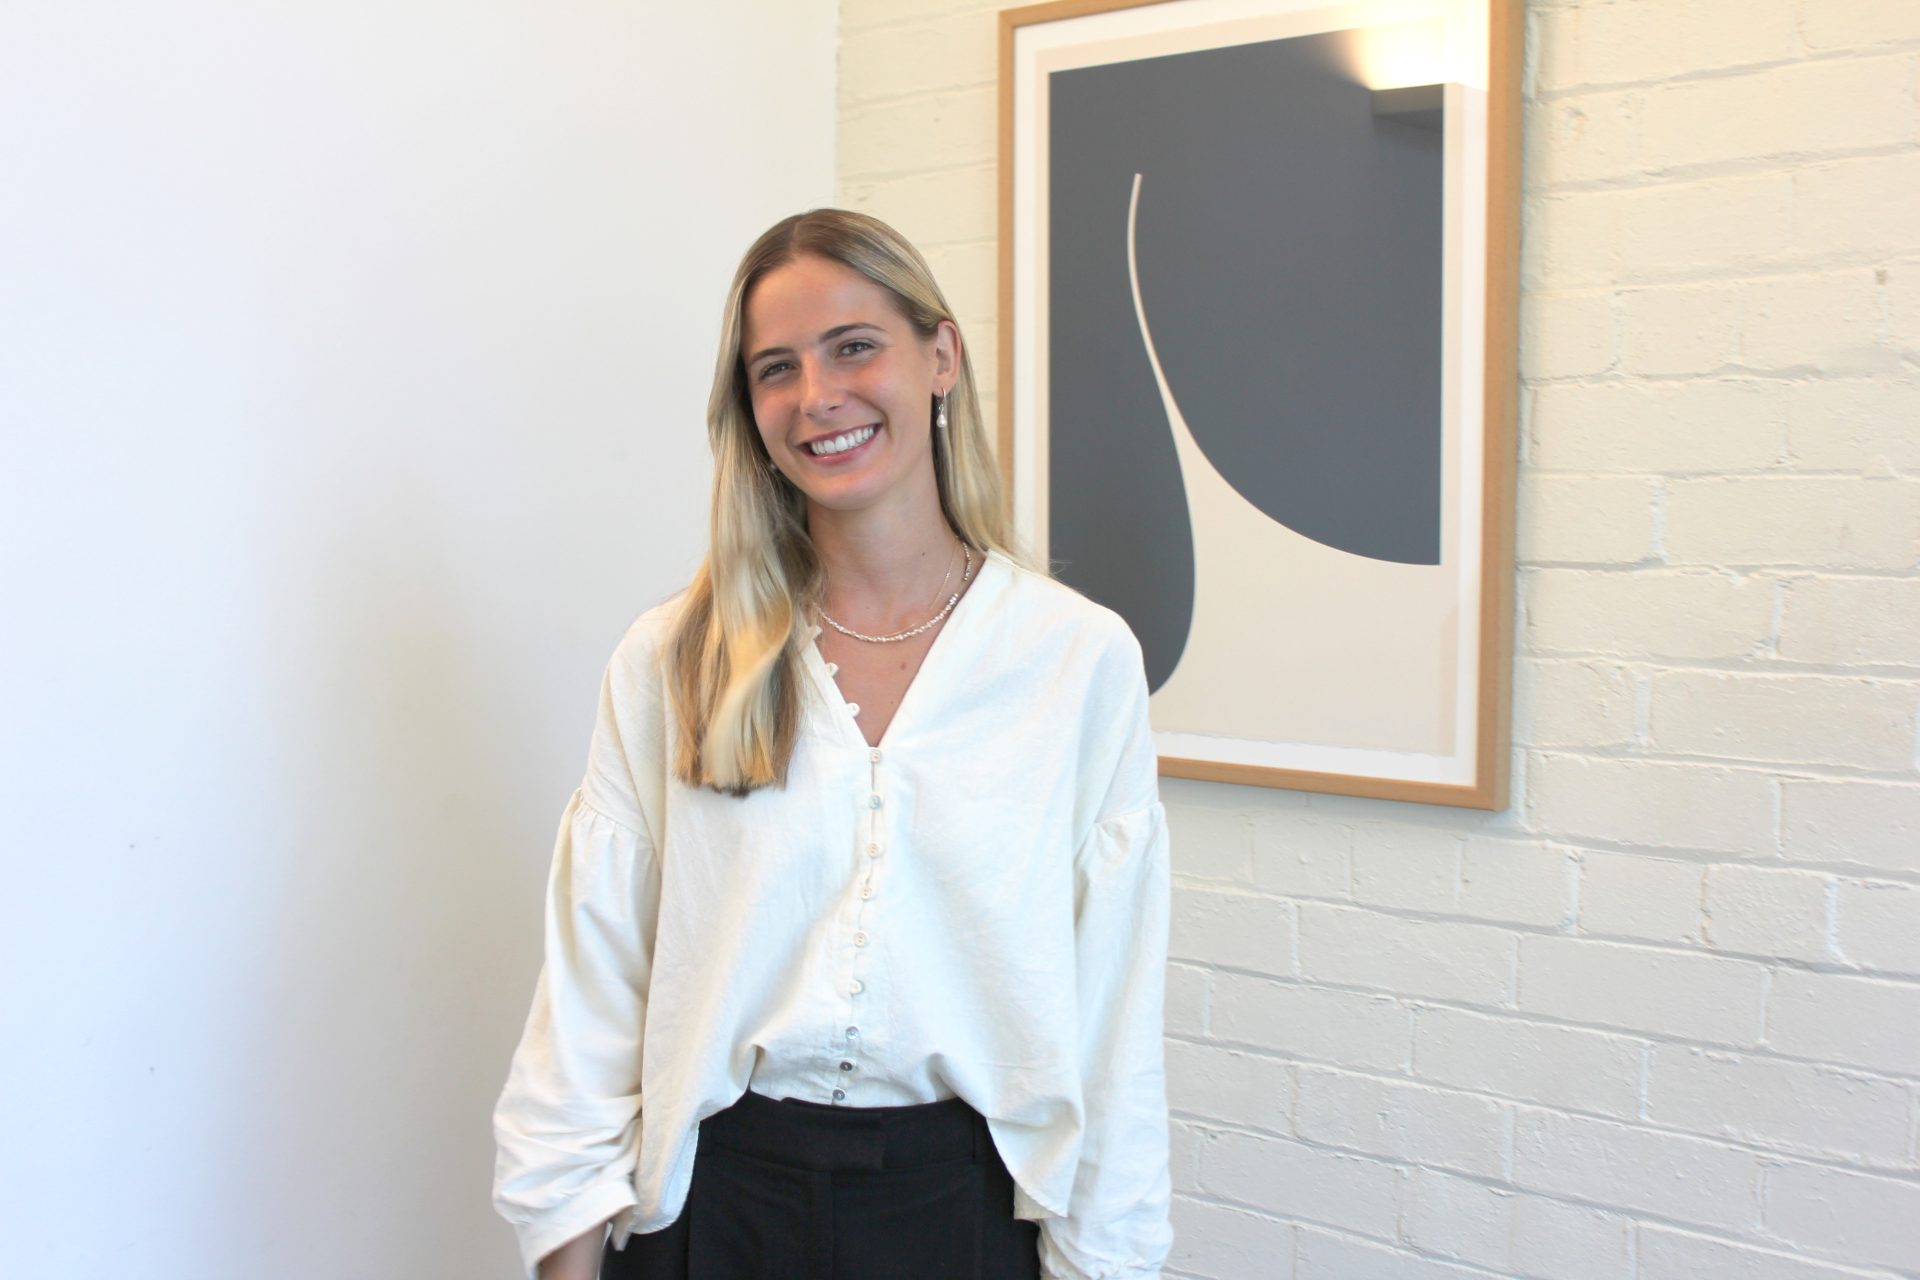 Chiropractor Clinic around me - Dr Aimee @ Selph in Rosebery, Sydney